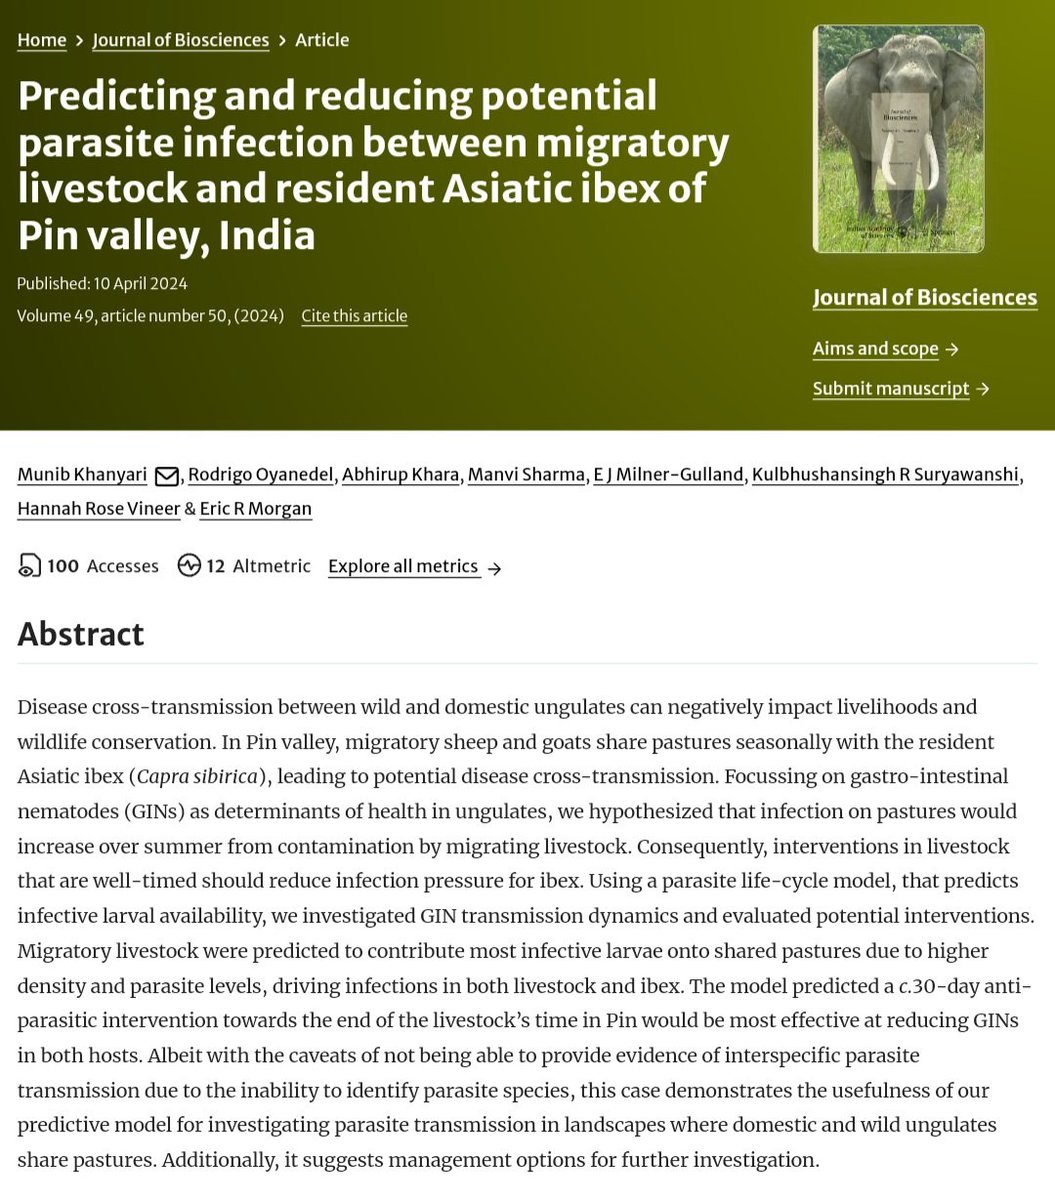 New research investigated the potential for GIN #parasite transmission between migratory livestock and #ibex in India, evaluating possible interventions. Find it here 👉 link.springer.com/article/10.100…